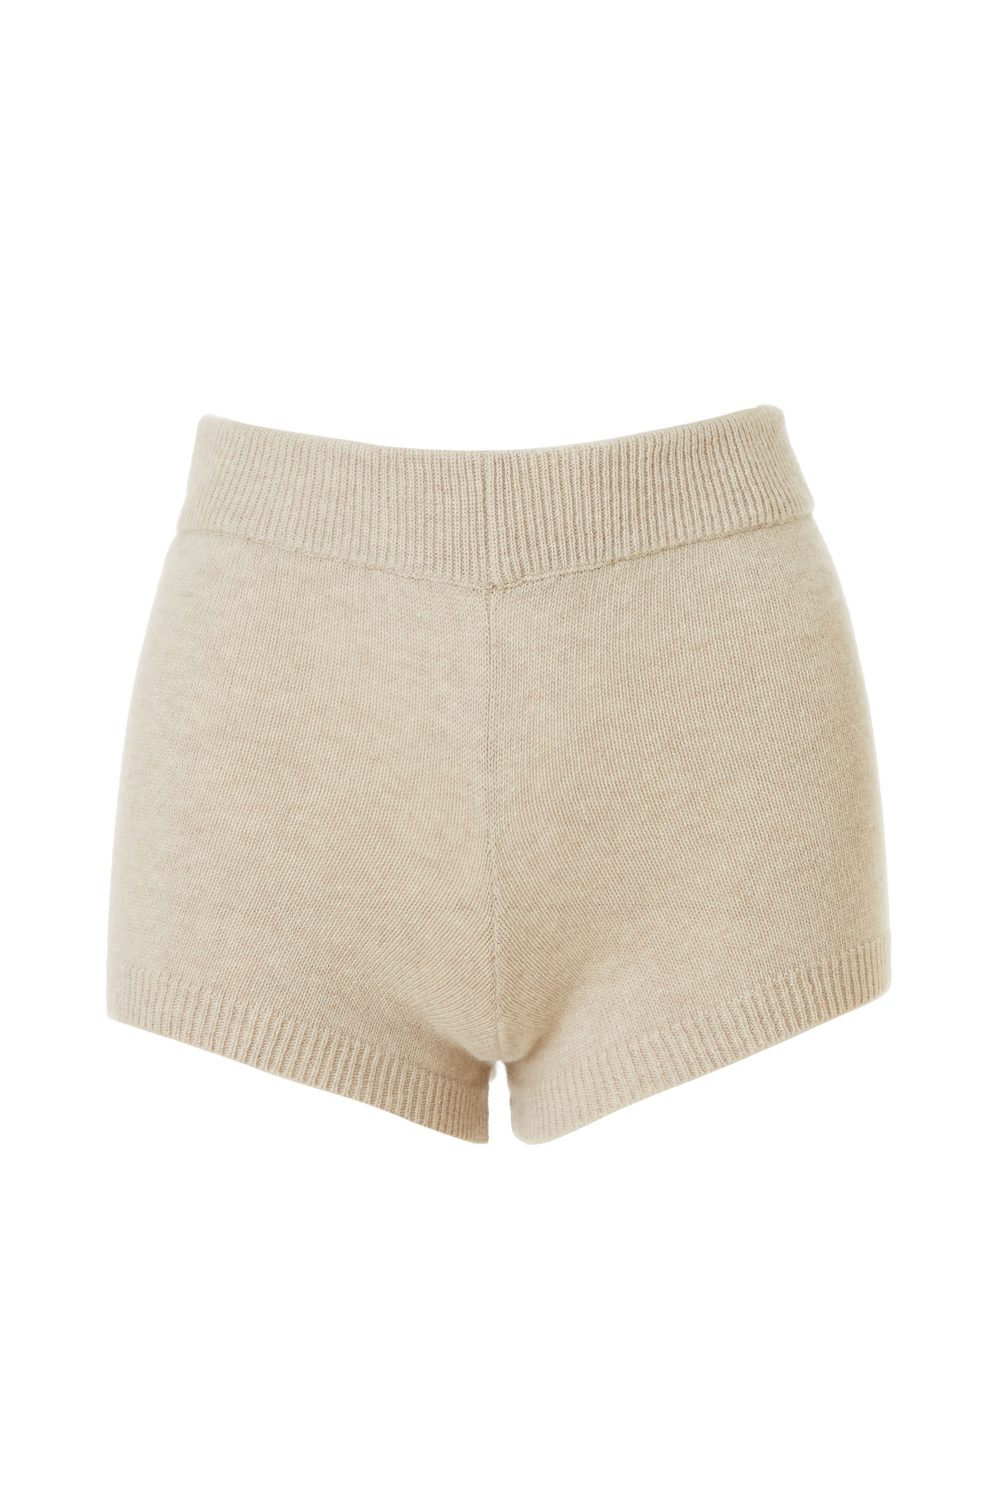 Knitted Shorts (with middle seam), White - AmiAmalia Luxury Knitwear